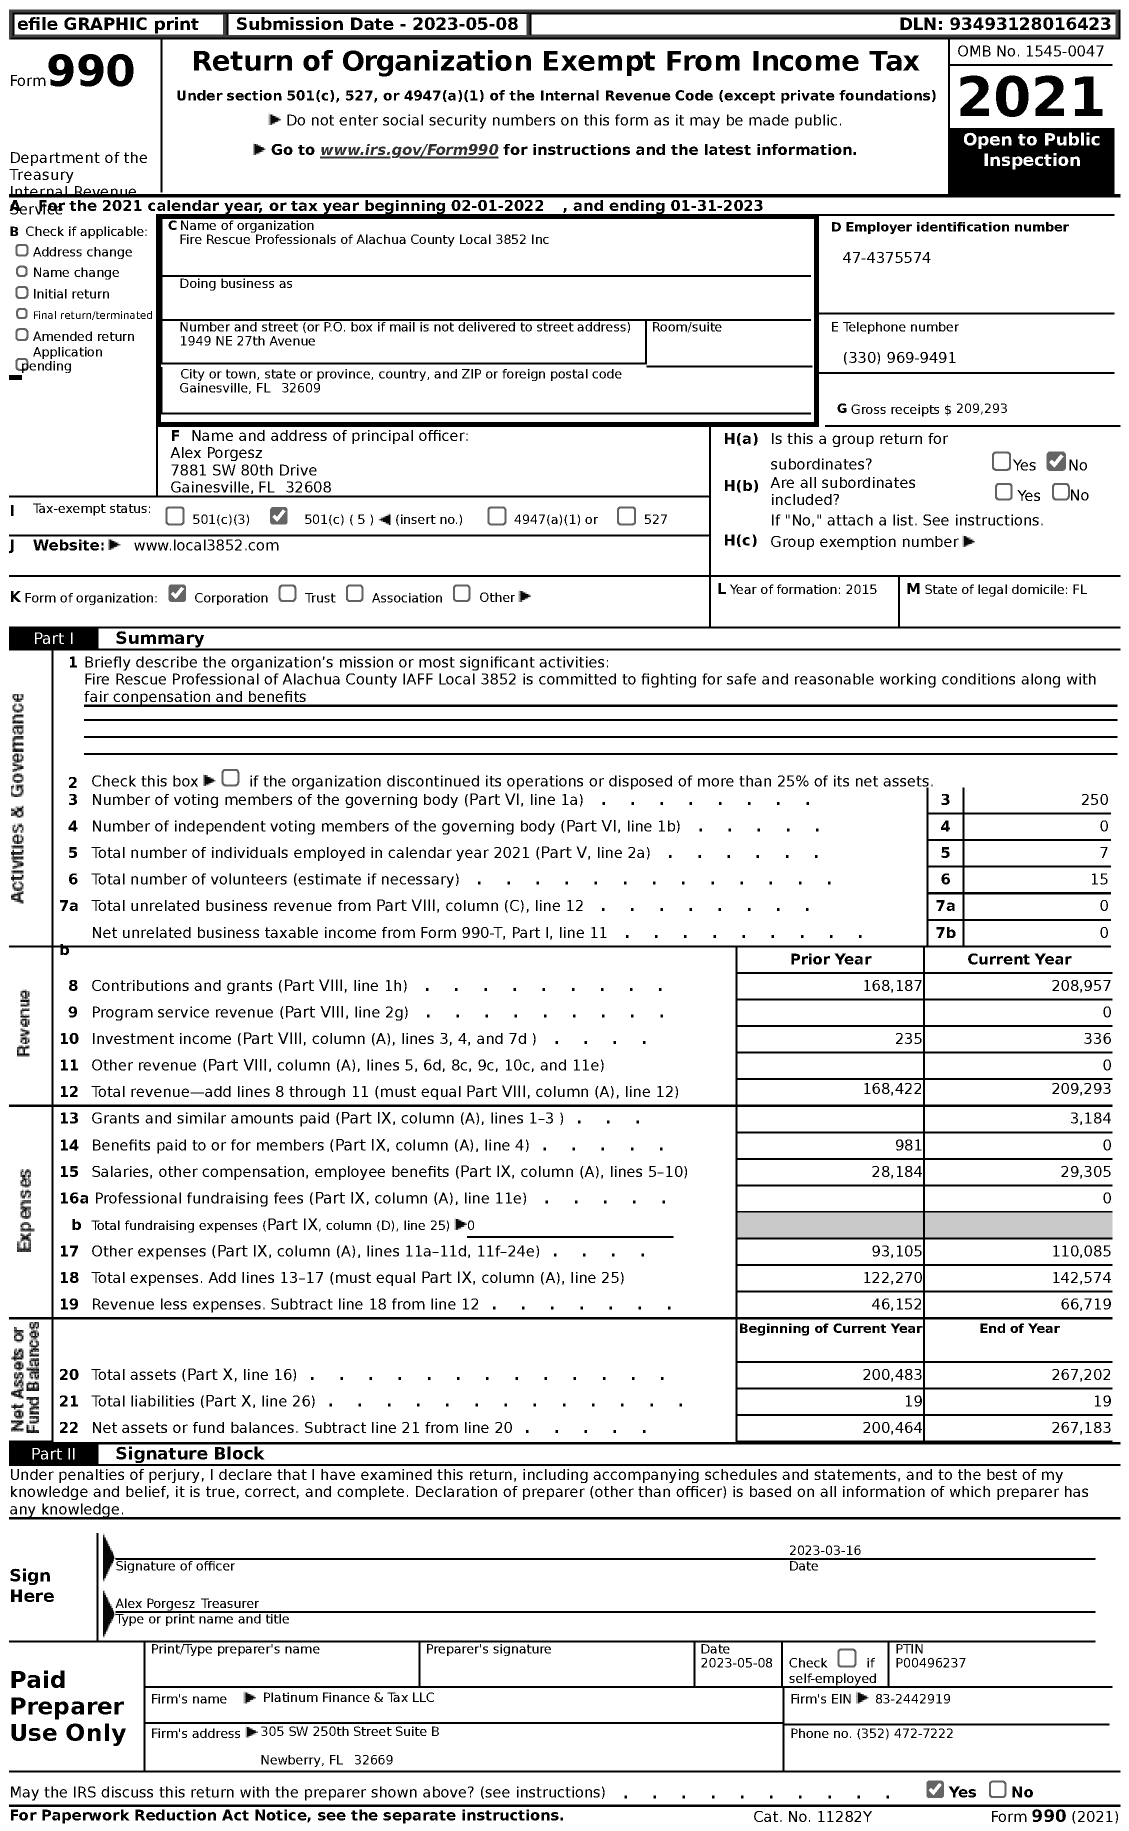 Image of first page of 2022 Form 990 for International Association of Fire Fighters - L3852 Fire Rescue Professionals of